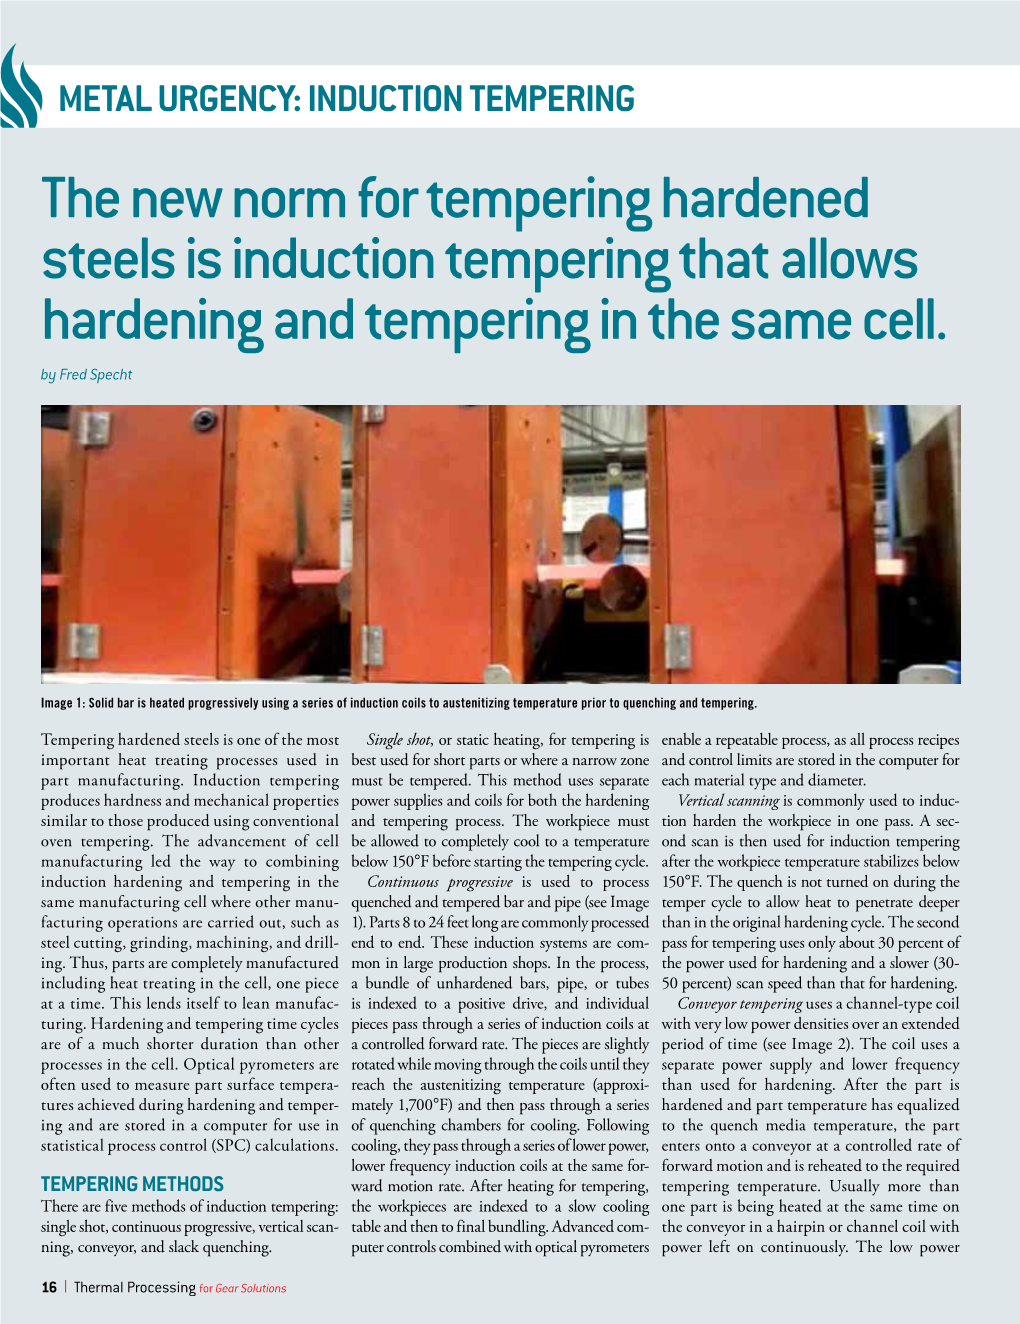 INDUCTION TEMPERING the New Norm for Tempering Hardened Steels Is Induction Tempering That Allows Hardening and Tempering in the Same Cell